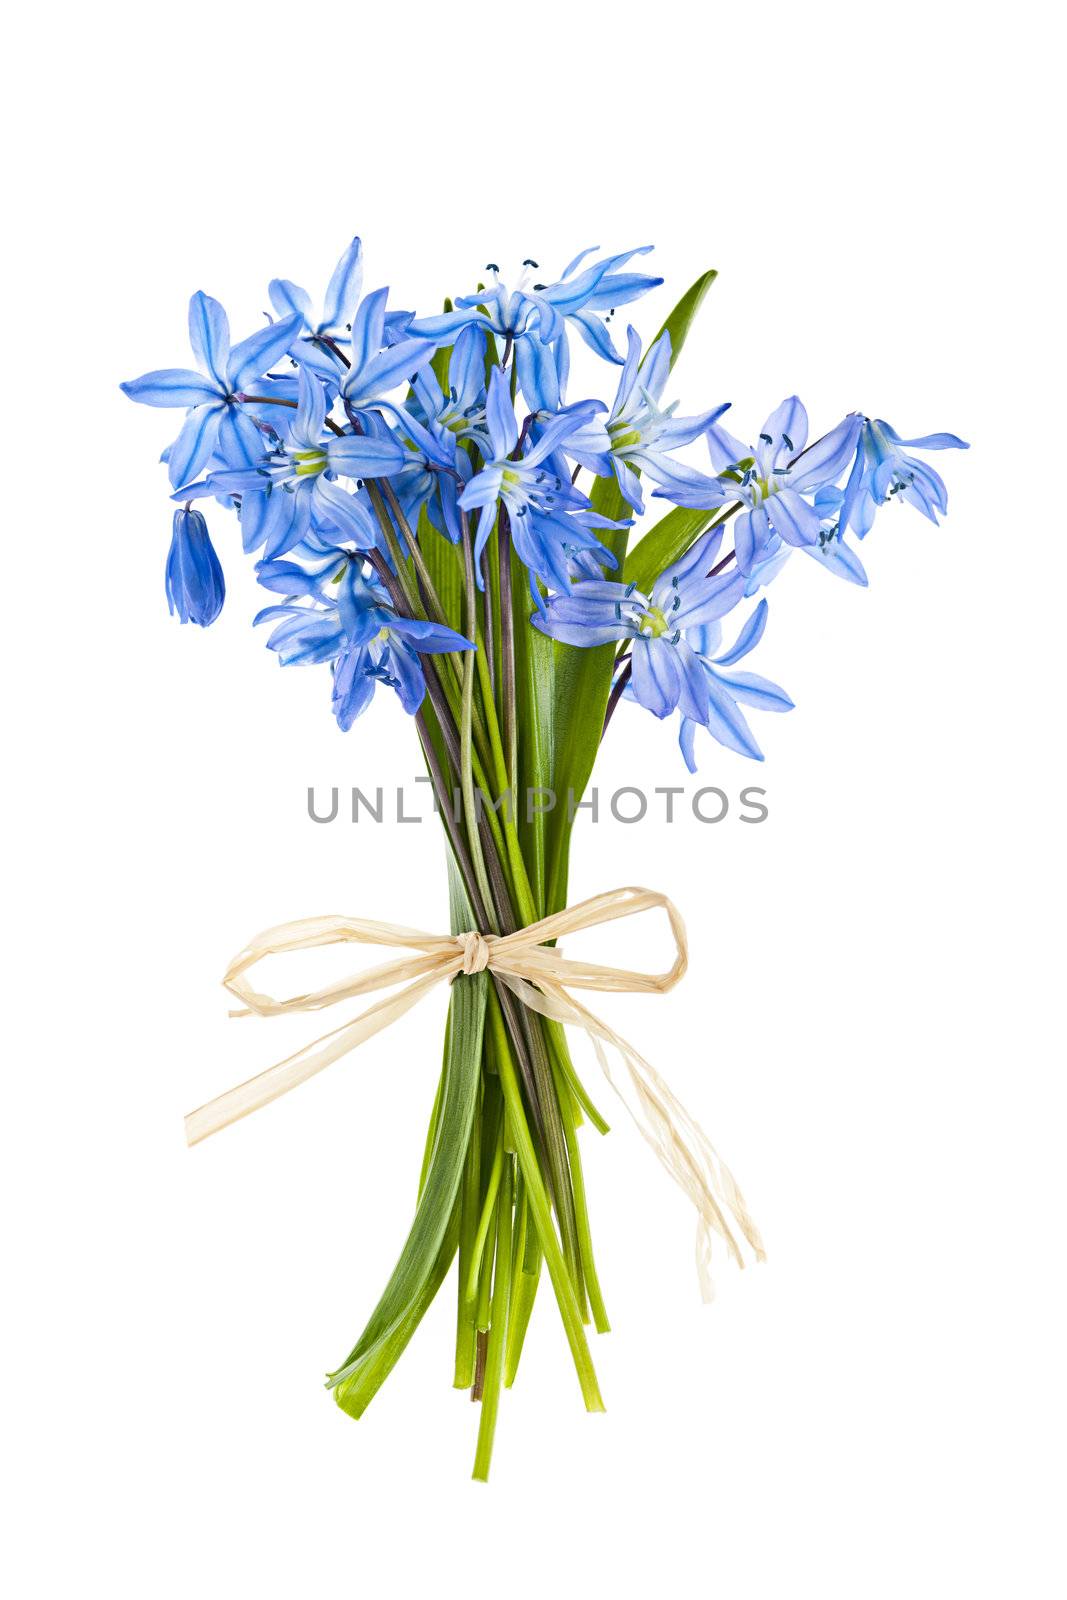 Glory-of-the-snow spring flowers bouquet isolated on white background